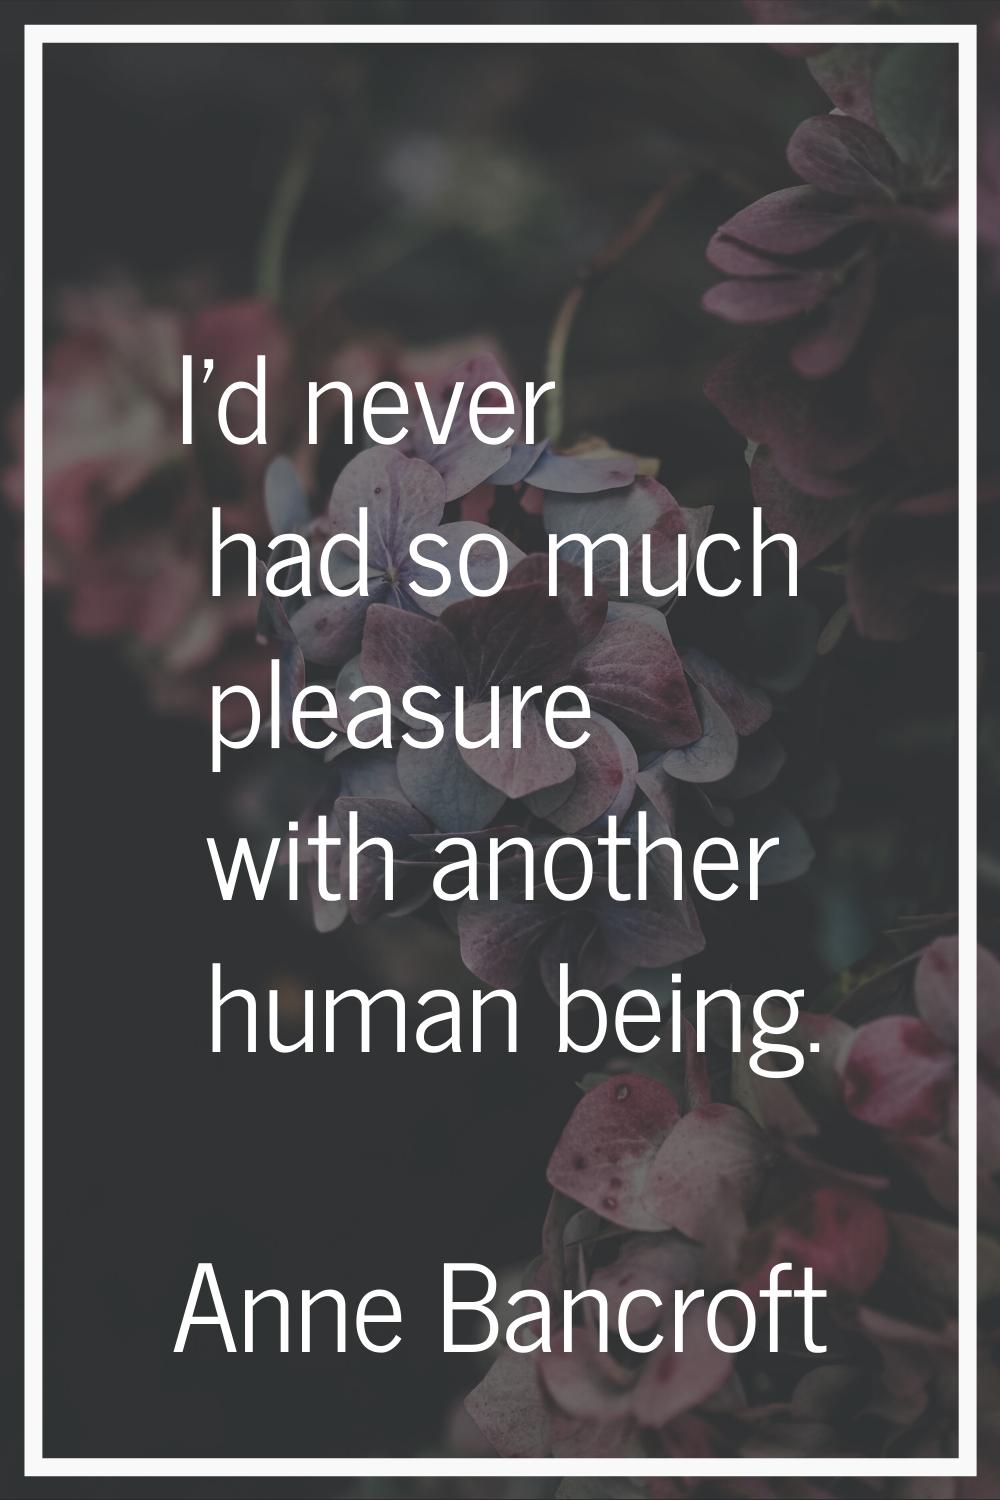 I'd never had so much pleasure with another human being.